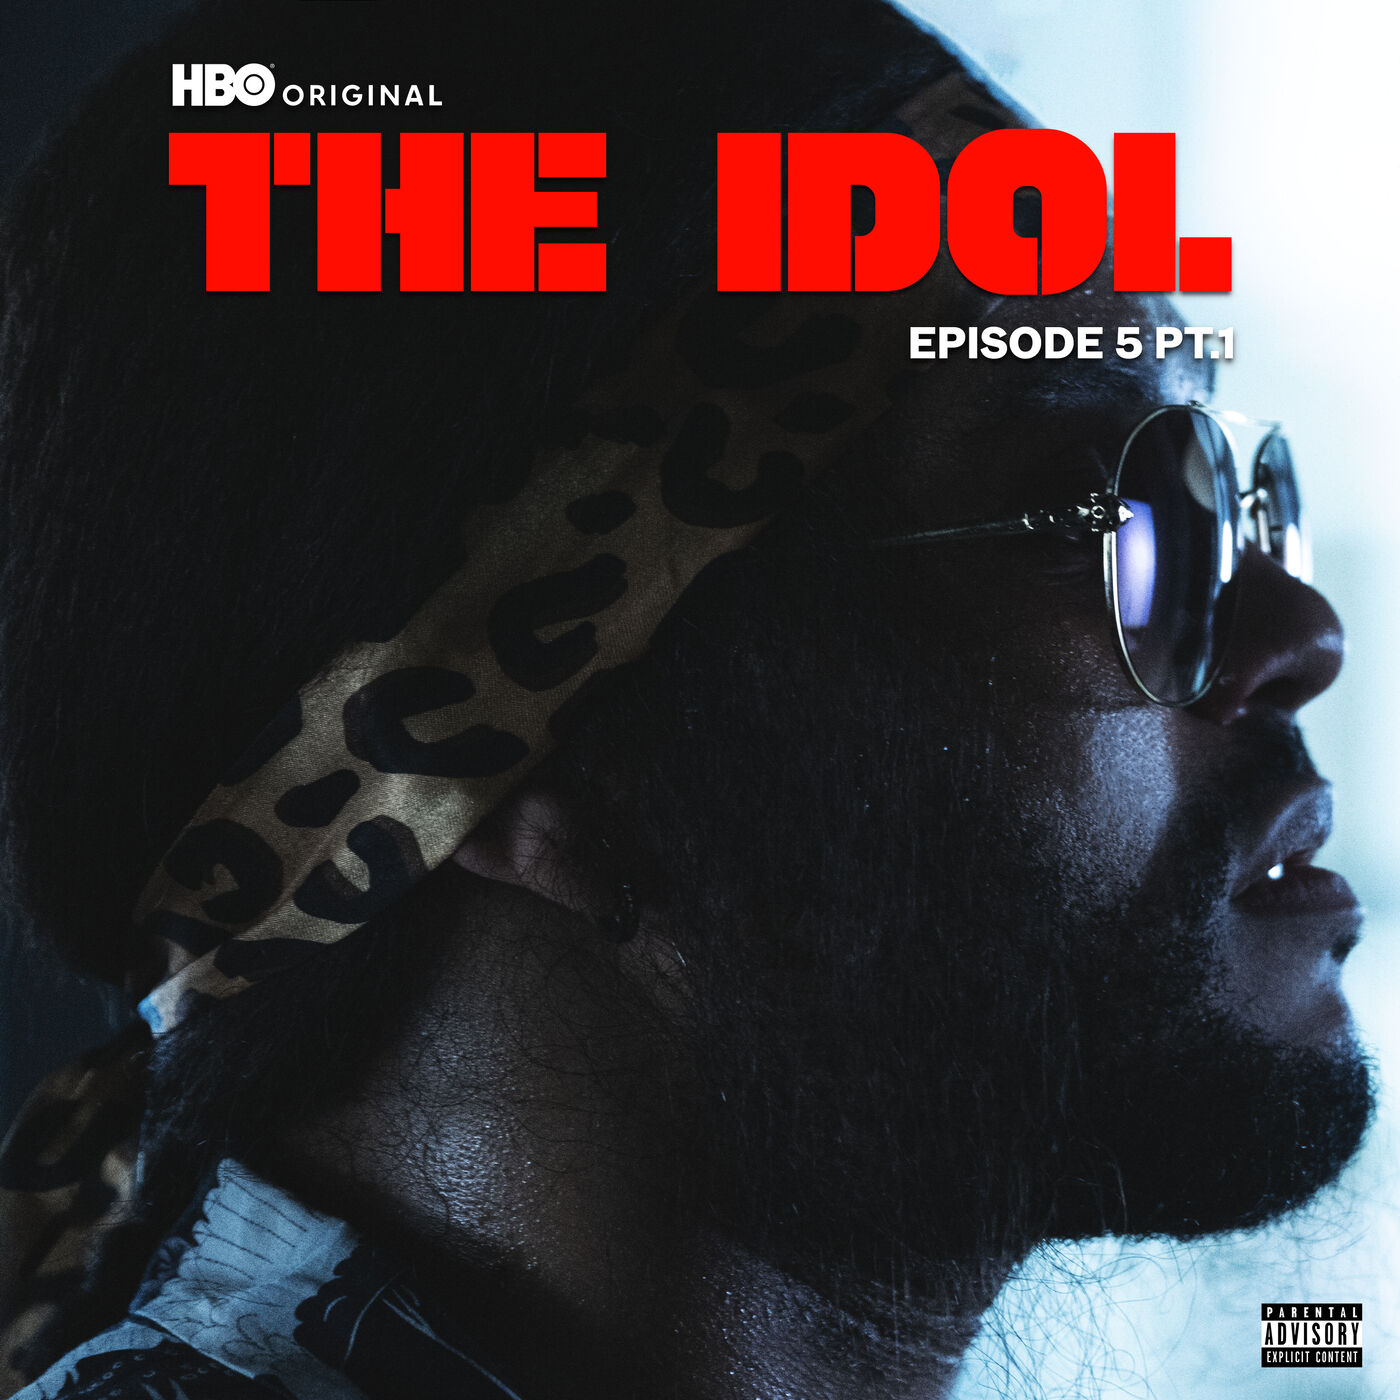 The Weeknd – The Idol Episode 5 Part 1 (Music from the HBO Original Series)Ⓔ【88.2kHz／24bit】美国区-OppsUpro音乐帝国